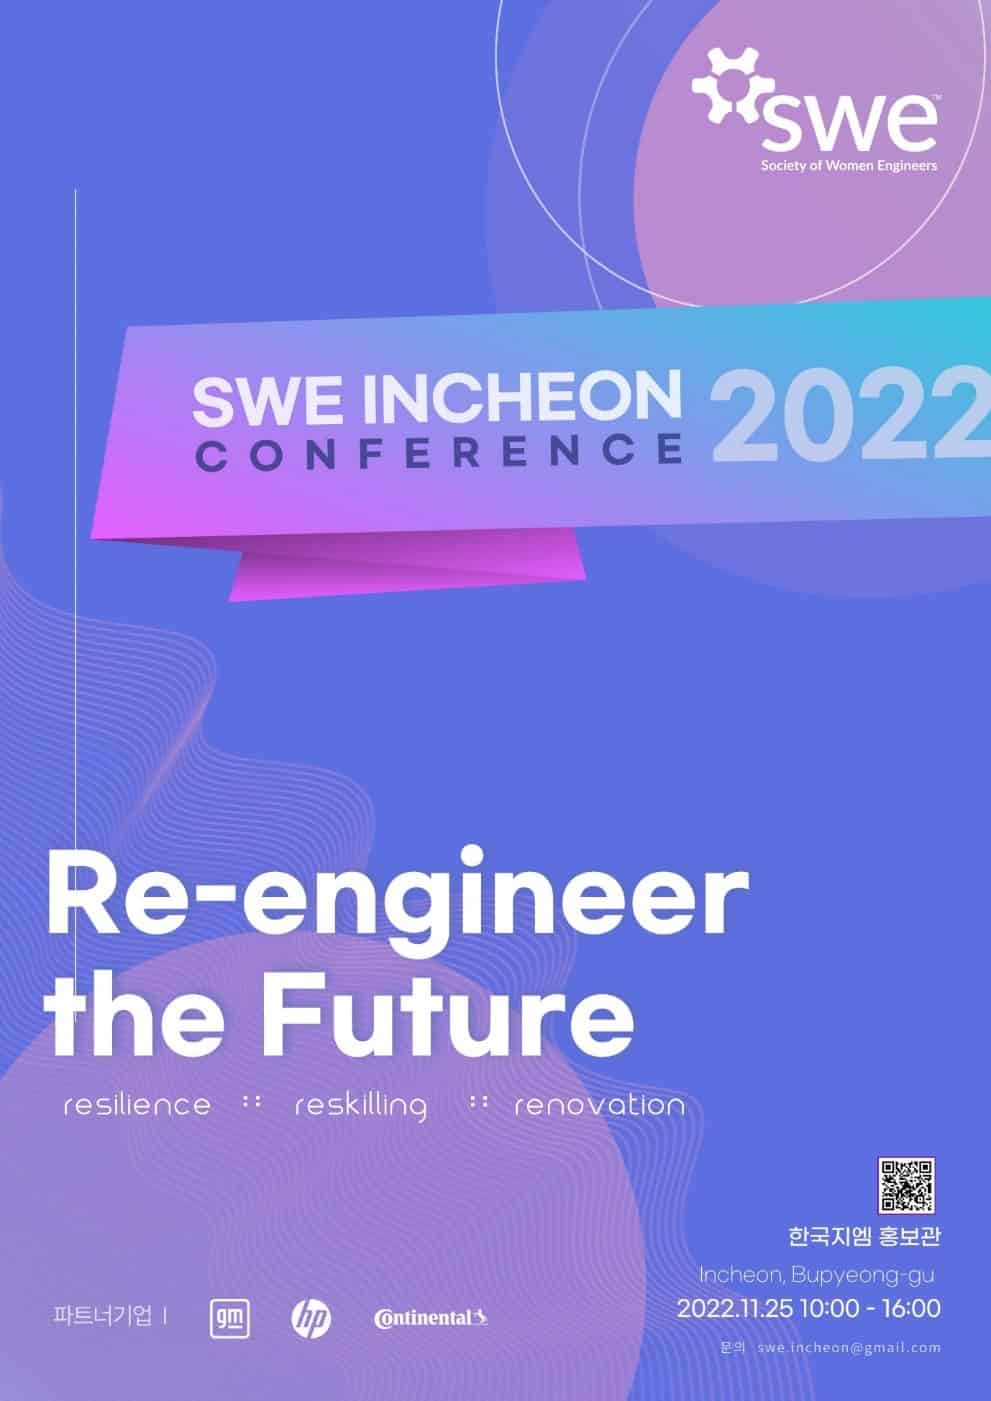 SWE Incheon Affiliate Hosting InPerson Conference in Korea All Together